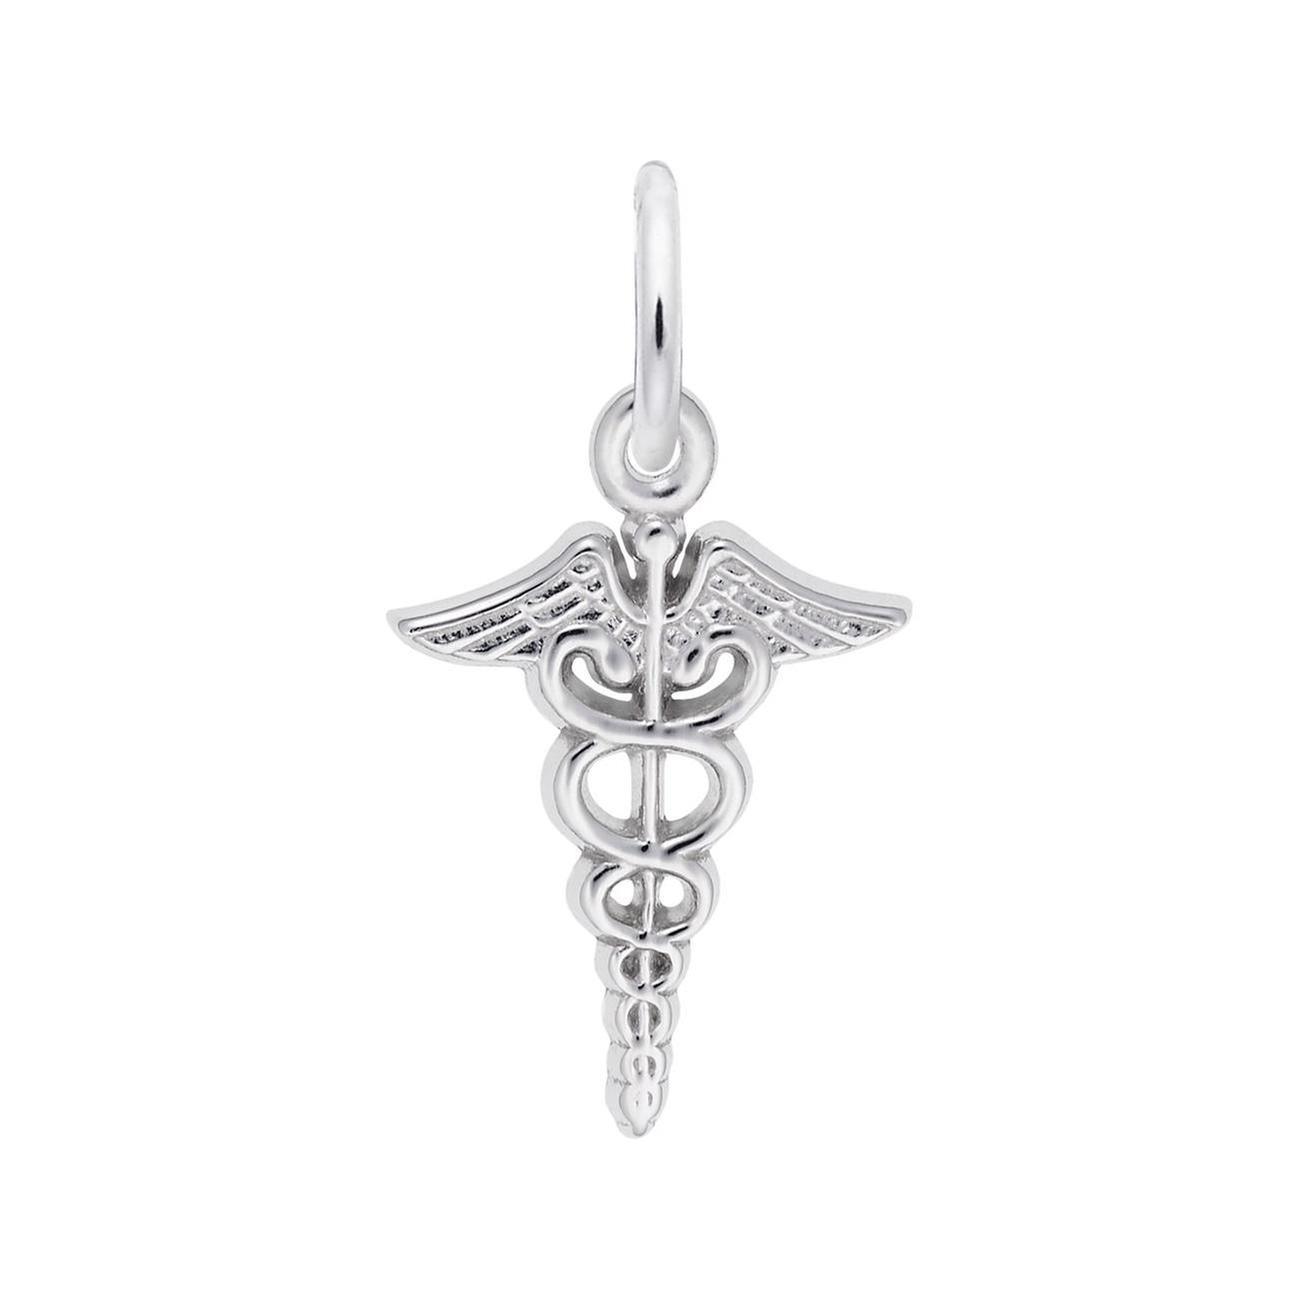 Details about   New 925 Sterling Silver OT Occupational Therapist Caduceus Charm 